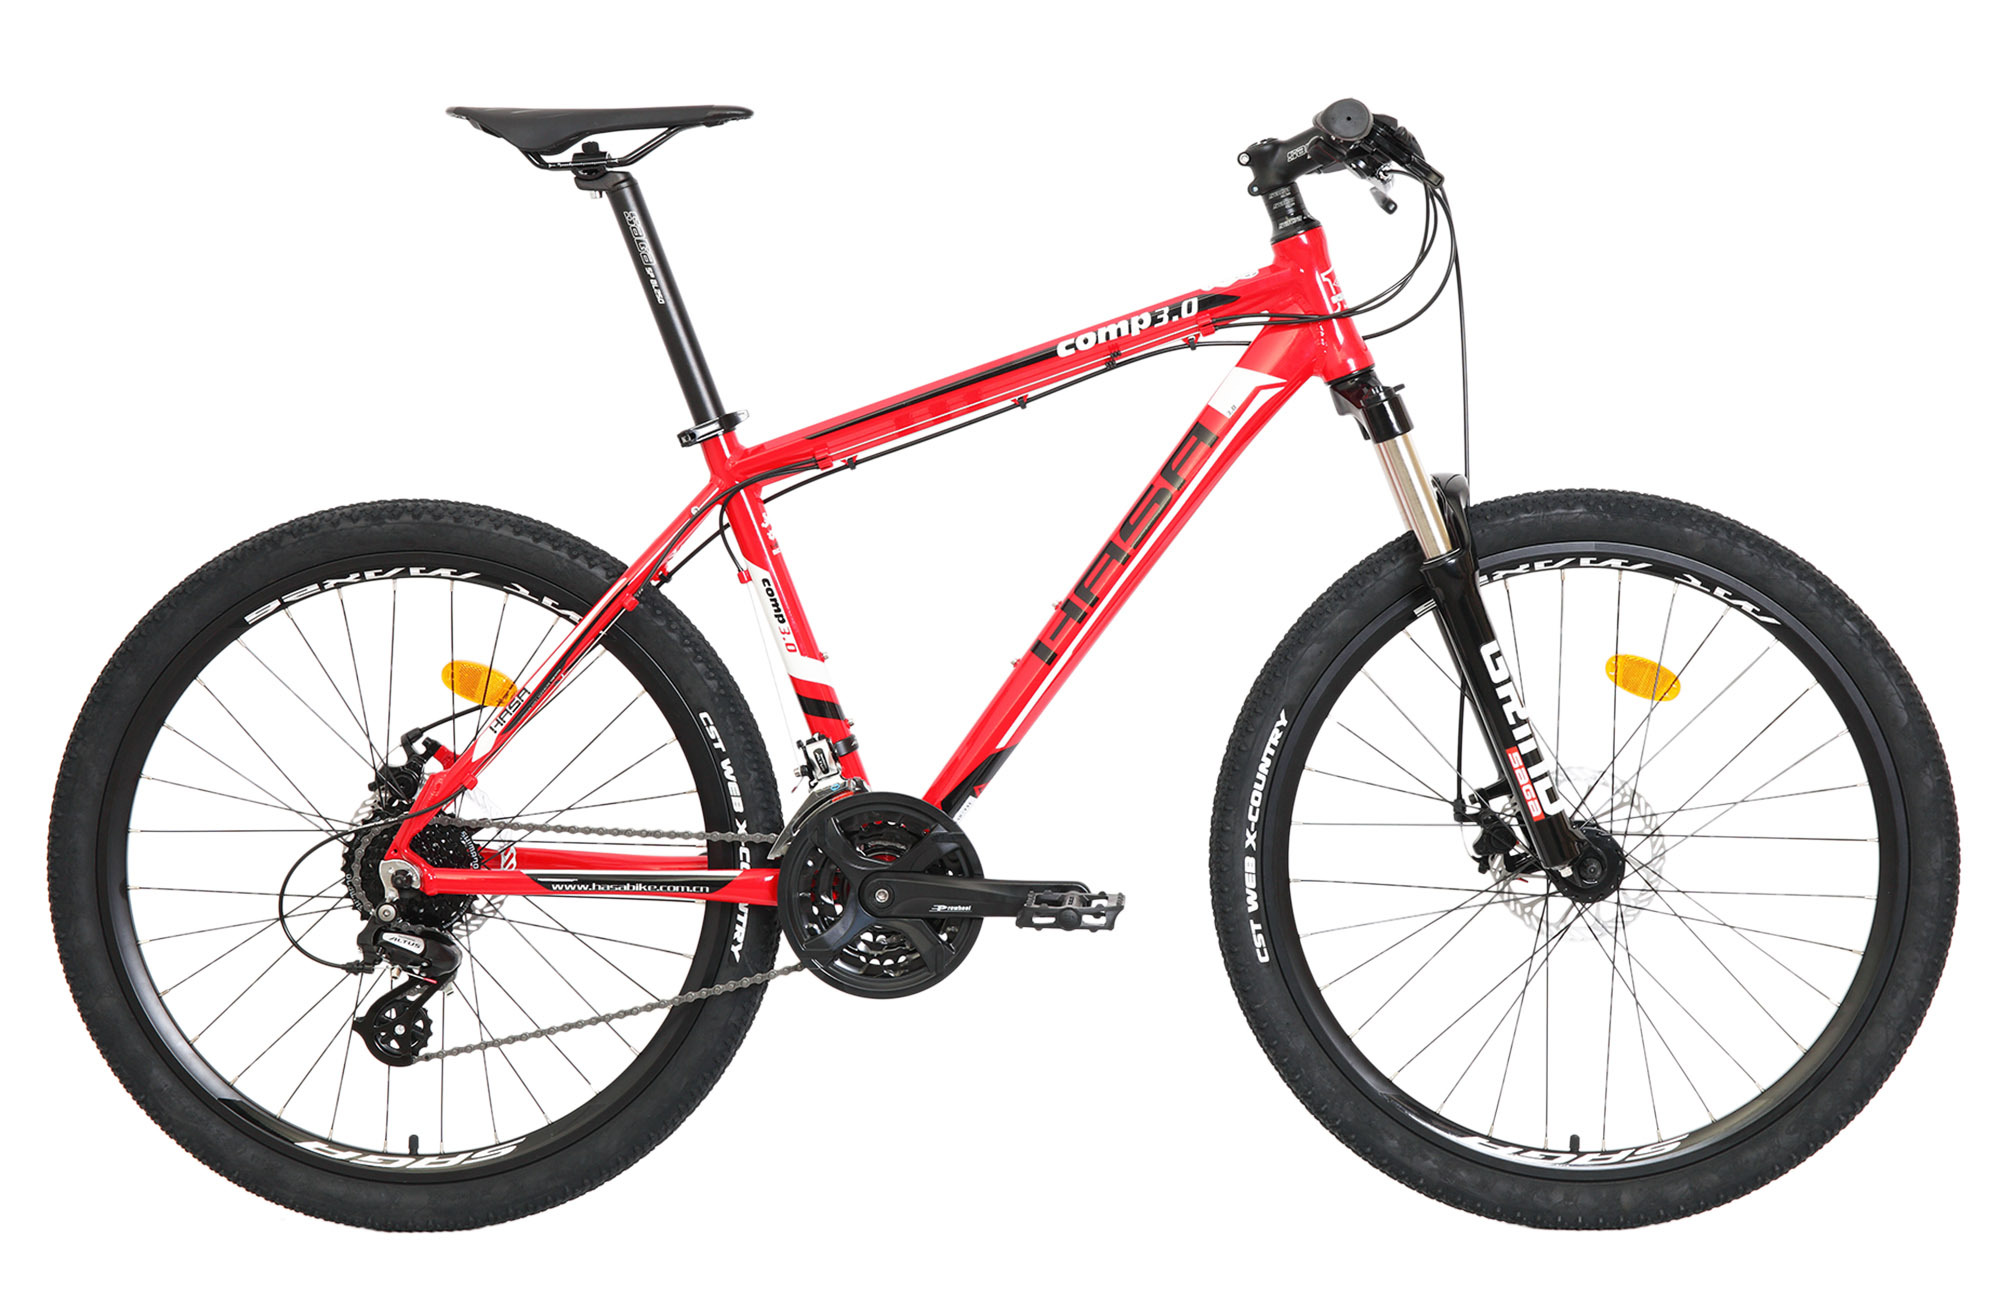 HASA COMP 3.0D Shimano 24 Speed Mountain Bike 26" - Frame Size 19" Red